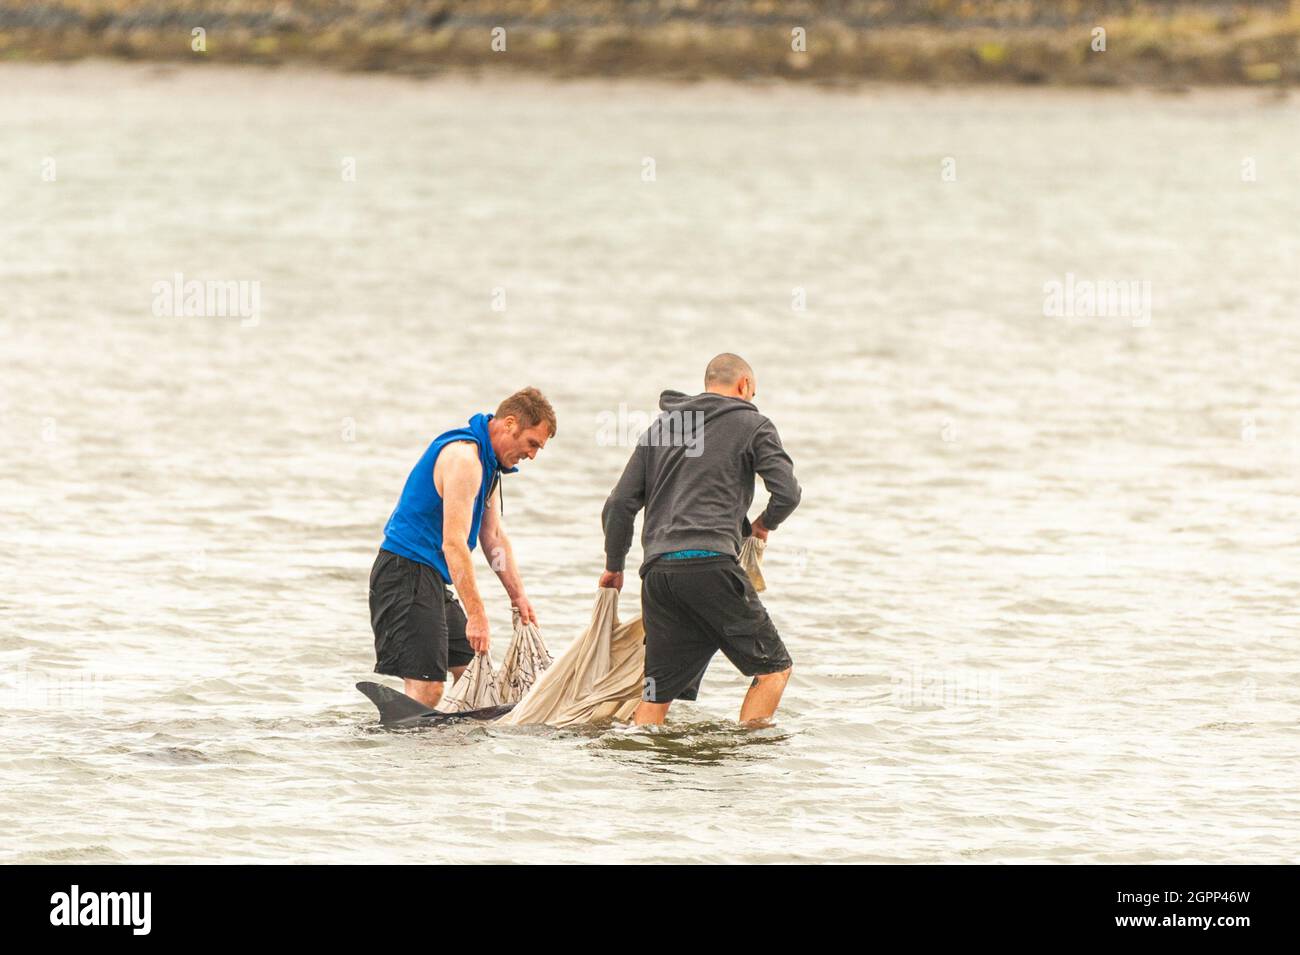 Timoleague, West Cork, Ireland. 30th Sep, 2021. Another dolphin has stranded in West Cork. A dolphin stranded itself in Courtmacsherry in January this year. This dolphin has a damaged tail and one eye is permanently closed. Two concerned locals, Mick and Clive, attempted to help the dolphin swim out to sea. Credit: AG News/Alamy Live News Stock Photo